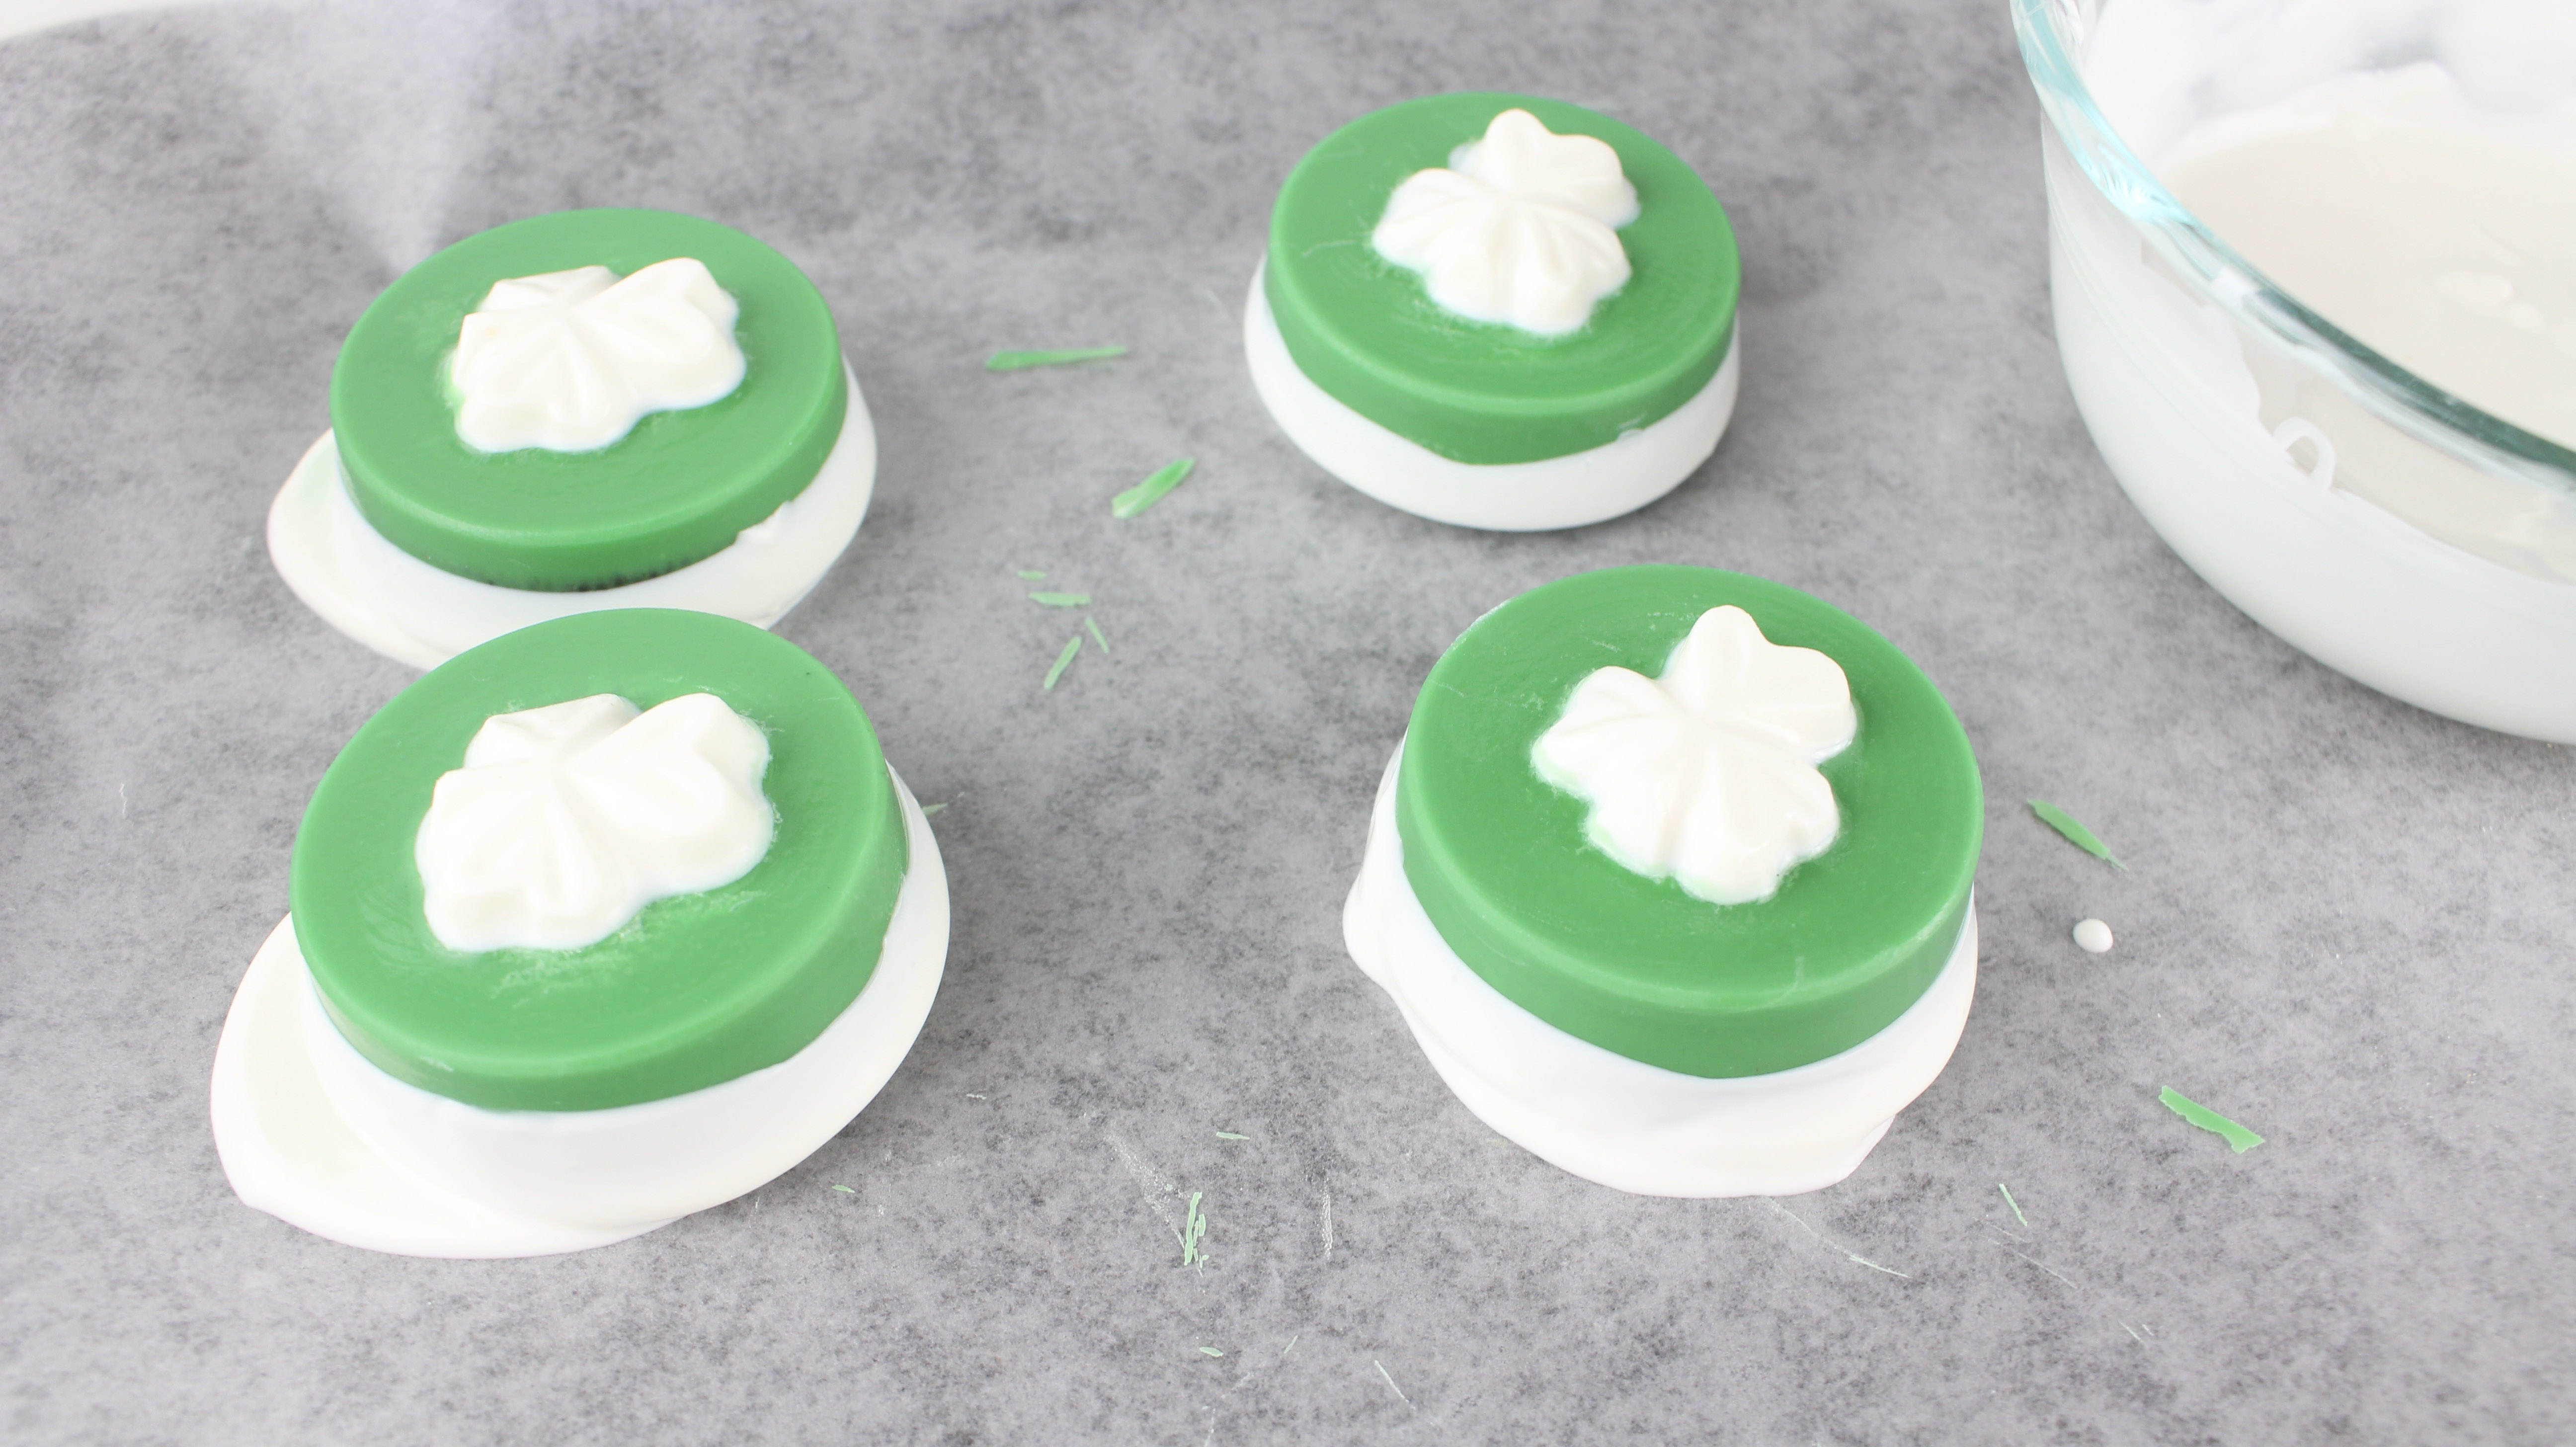 Want to make delicious St. Patrick's Day cookies? These shamrock cookies are made using Oreos and candy melts. Perfect for celebrating St. Patrick's Day.